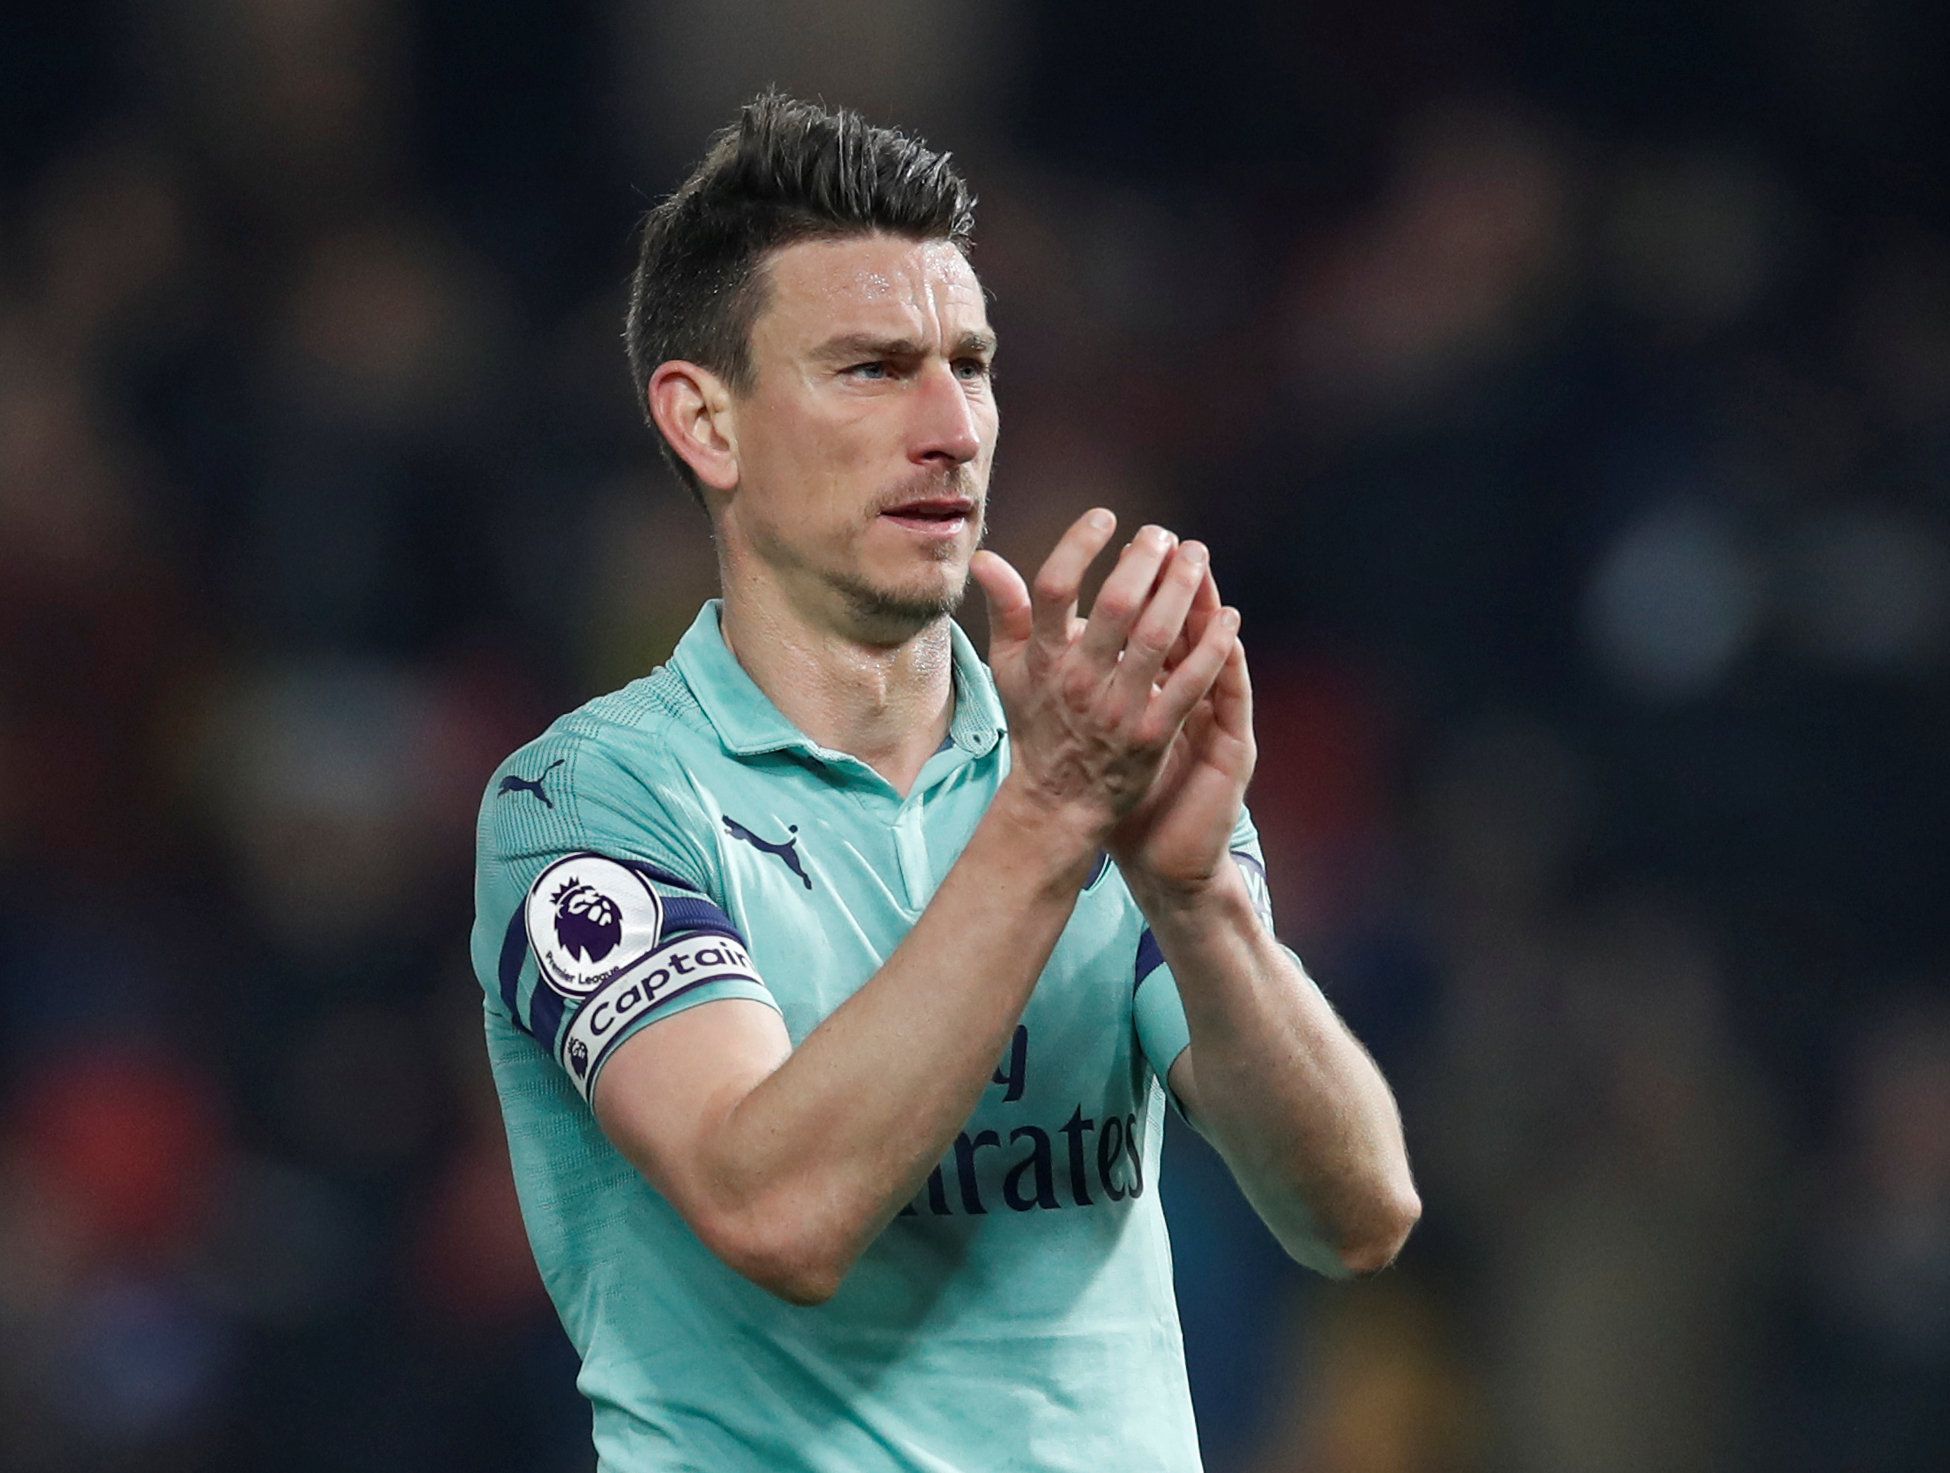 Soccer Football - Premier League - Watford v Arsenal - Vicarage Road, Watford, Britain - April 15, 2019  Arsenal's Laurent Koscielny applauds fans after the match        REUTERS/David Klein  EDITORIAL USE ONLY. No use with unauthorized audio, video, data, fixture lists, club/league logos or 